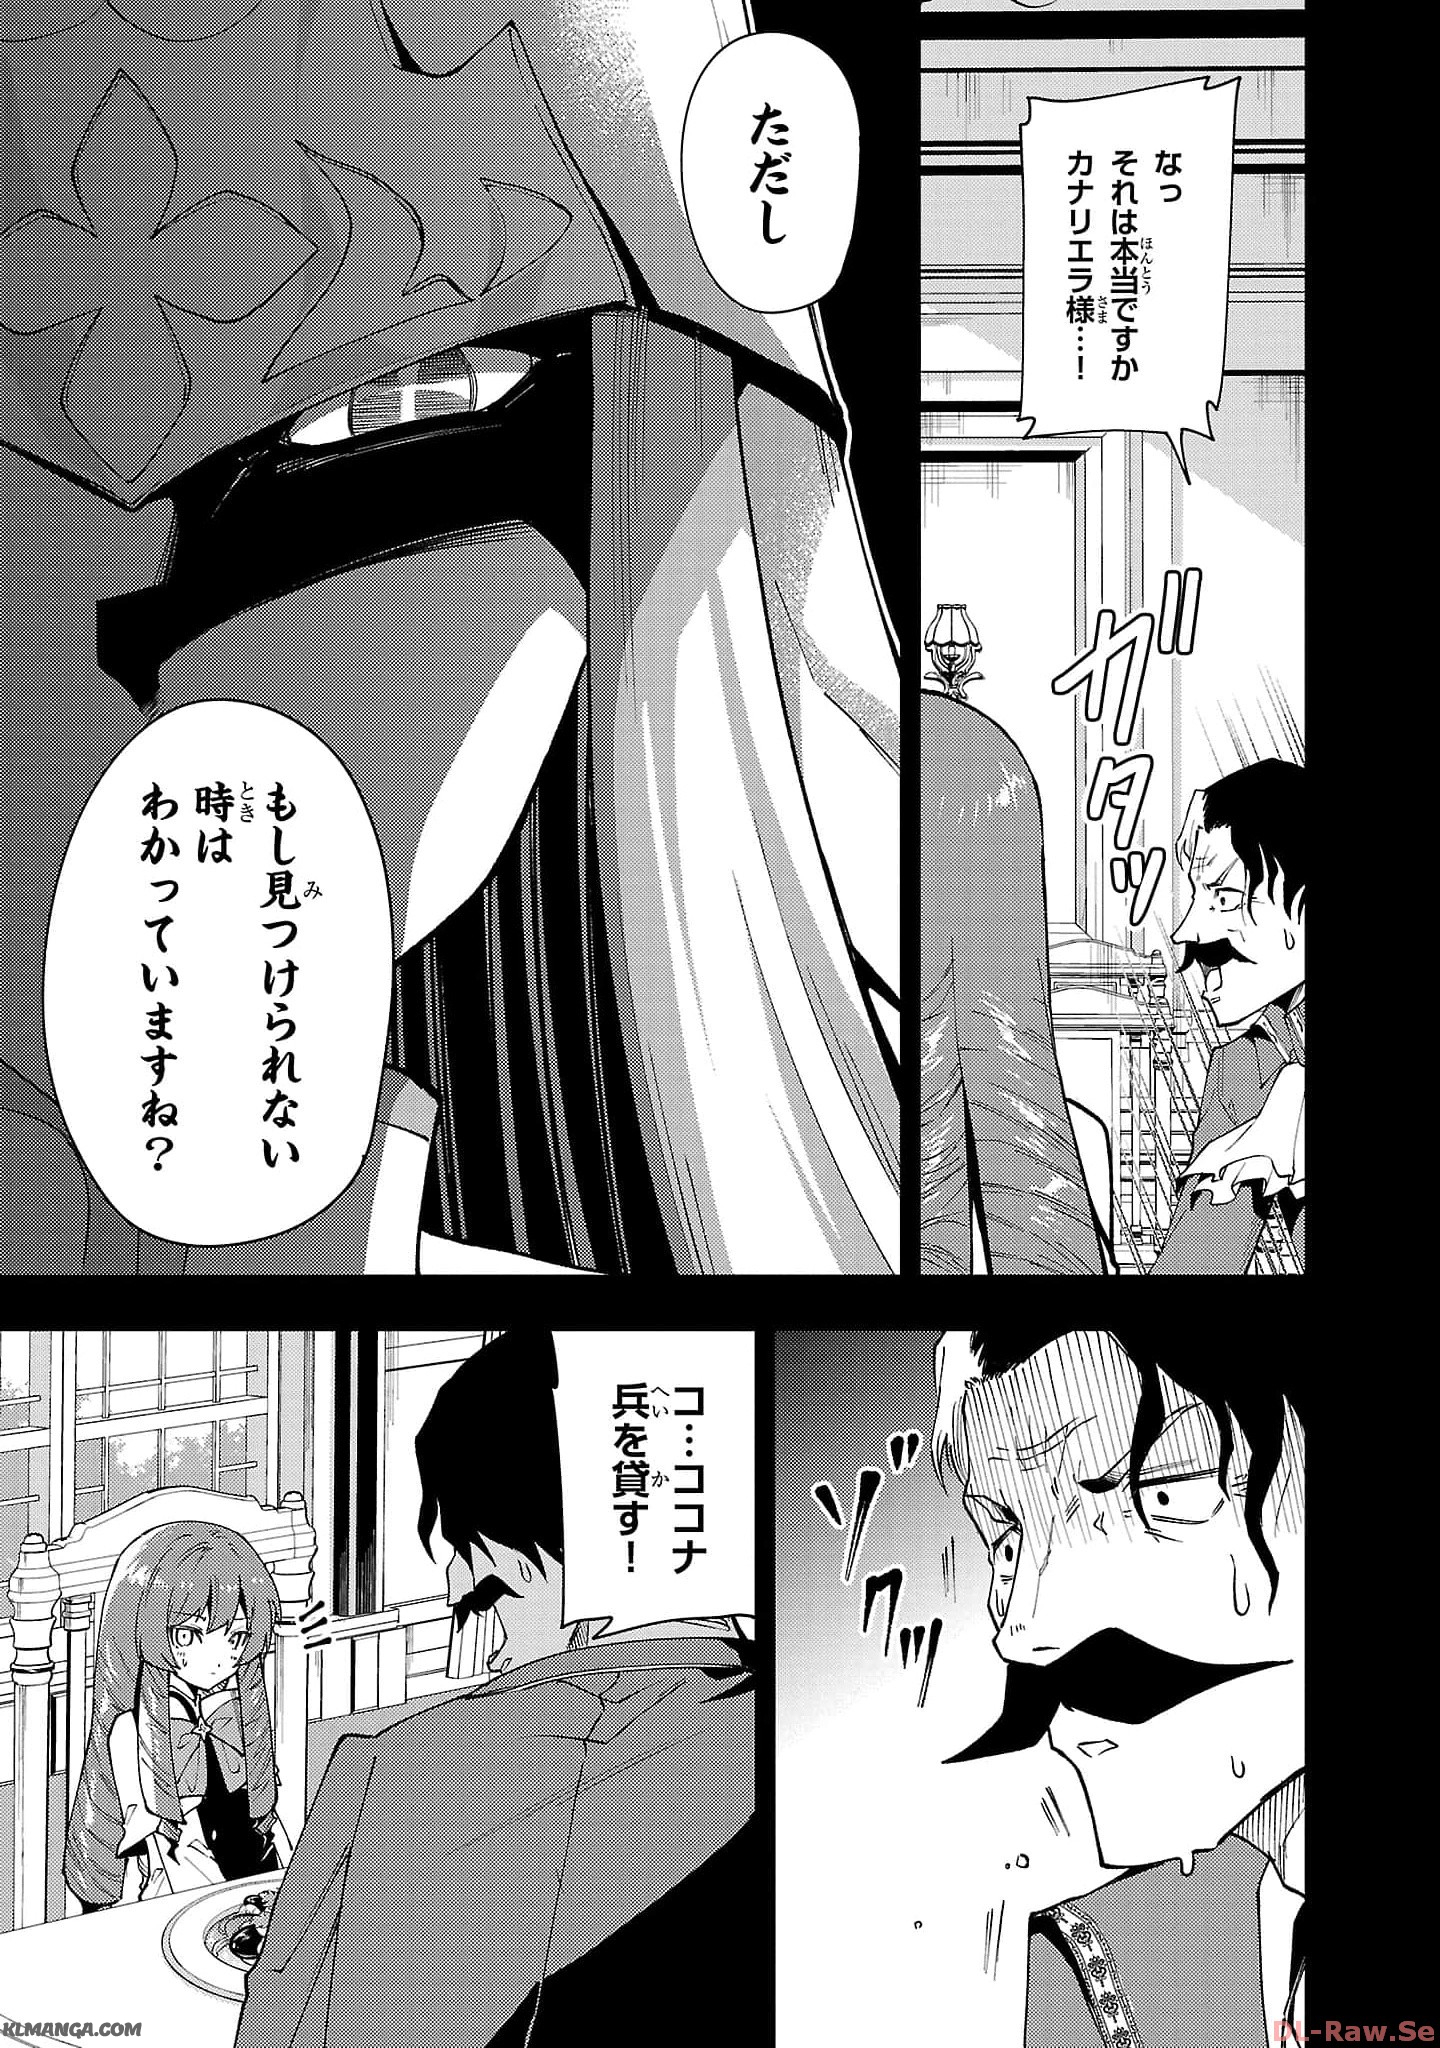 Hungry Saint and Full-Stomach Witch’s Slow Life in Another World! 腹ペコ聖女とまんぷく魔女の異世界スローライフ! 第21話 - Page 7